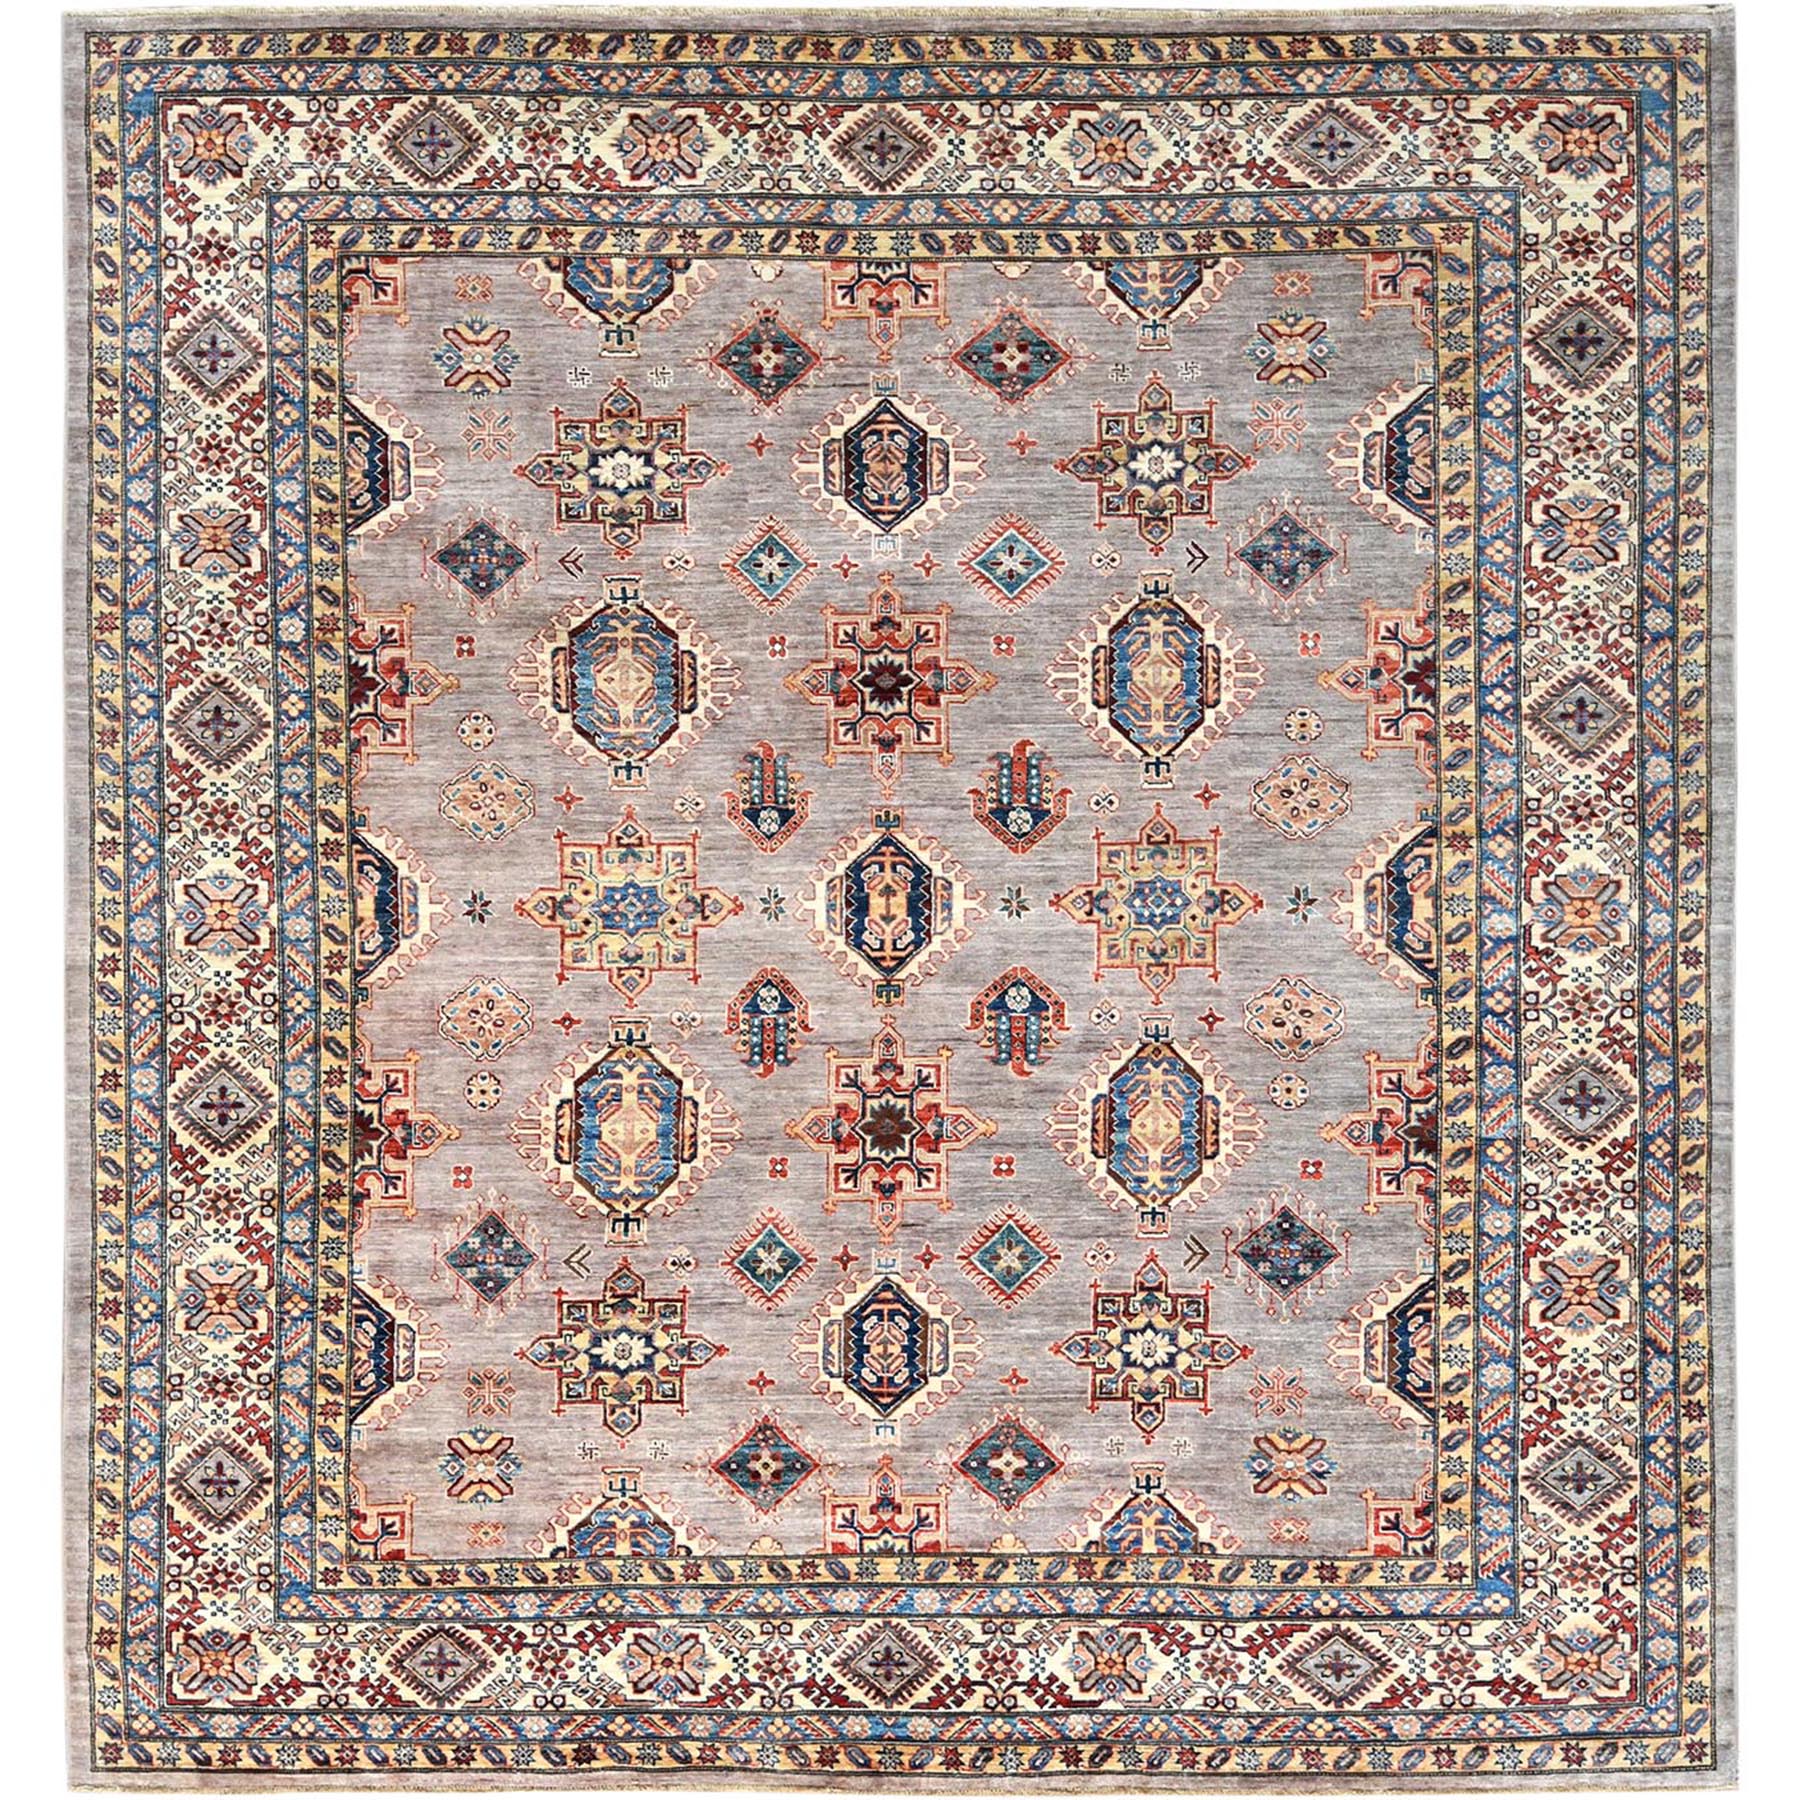  Wool Hand-Knotted Area Rug 9'5